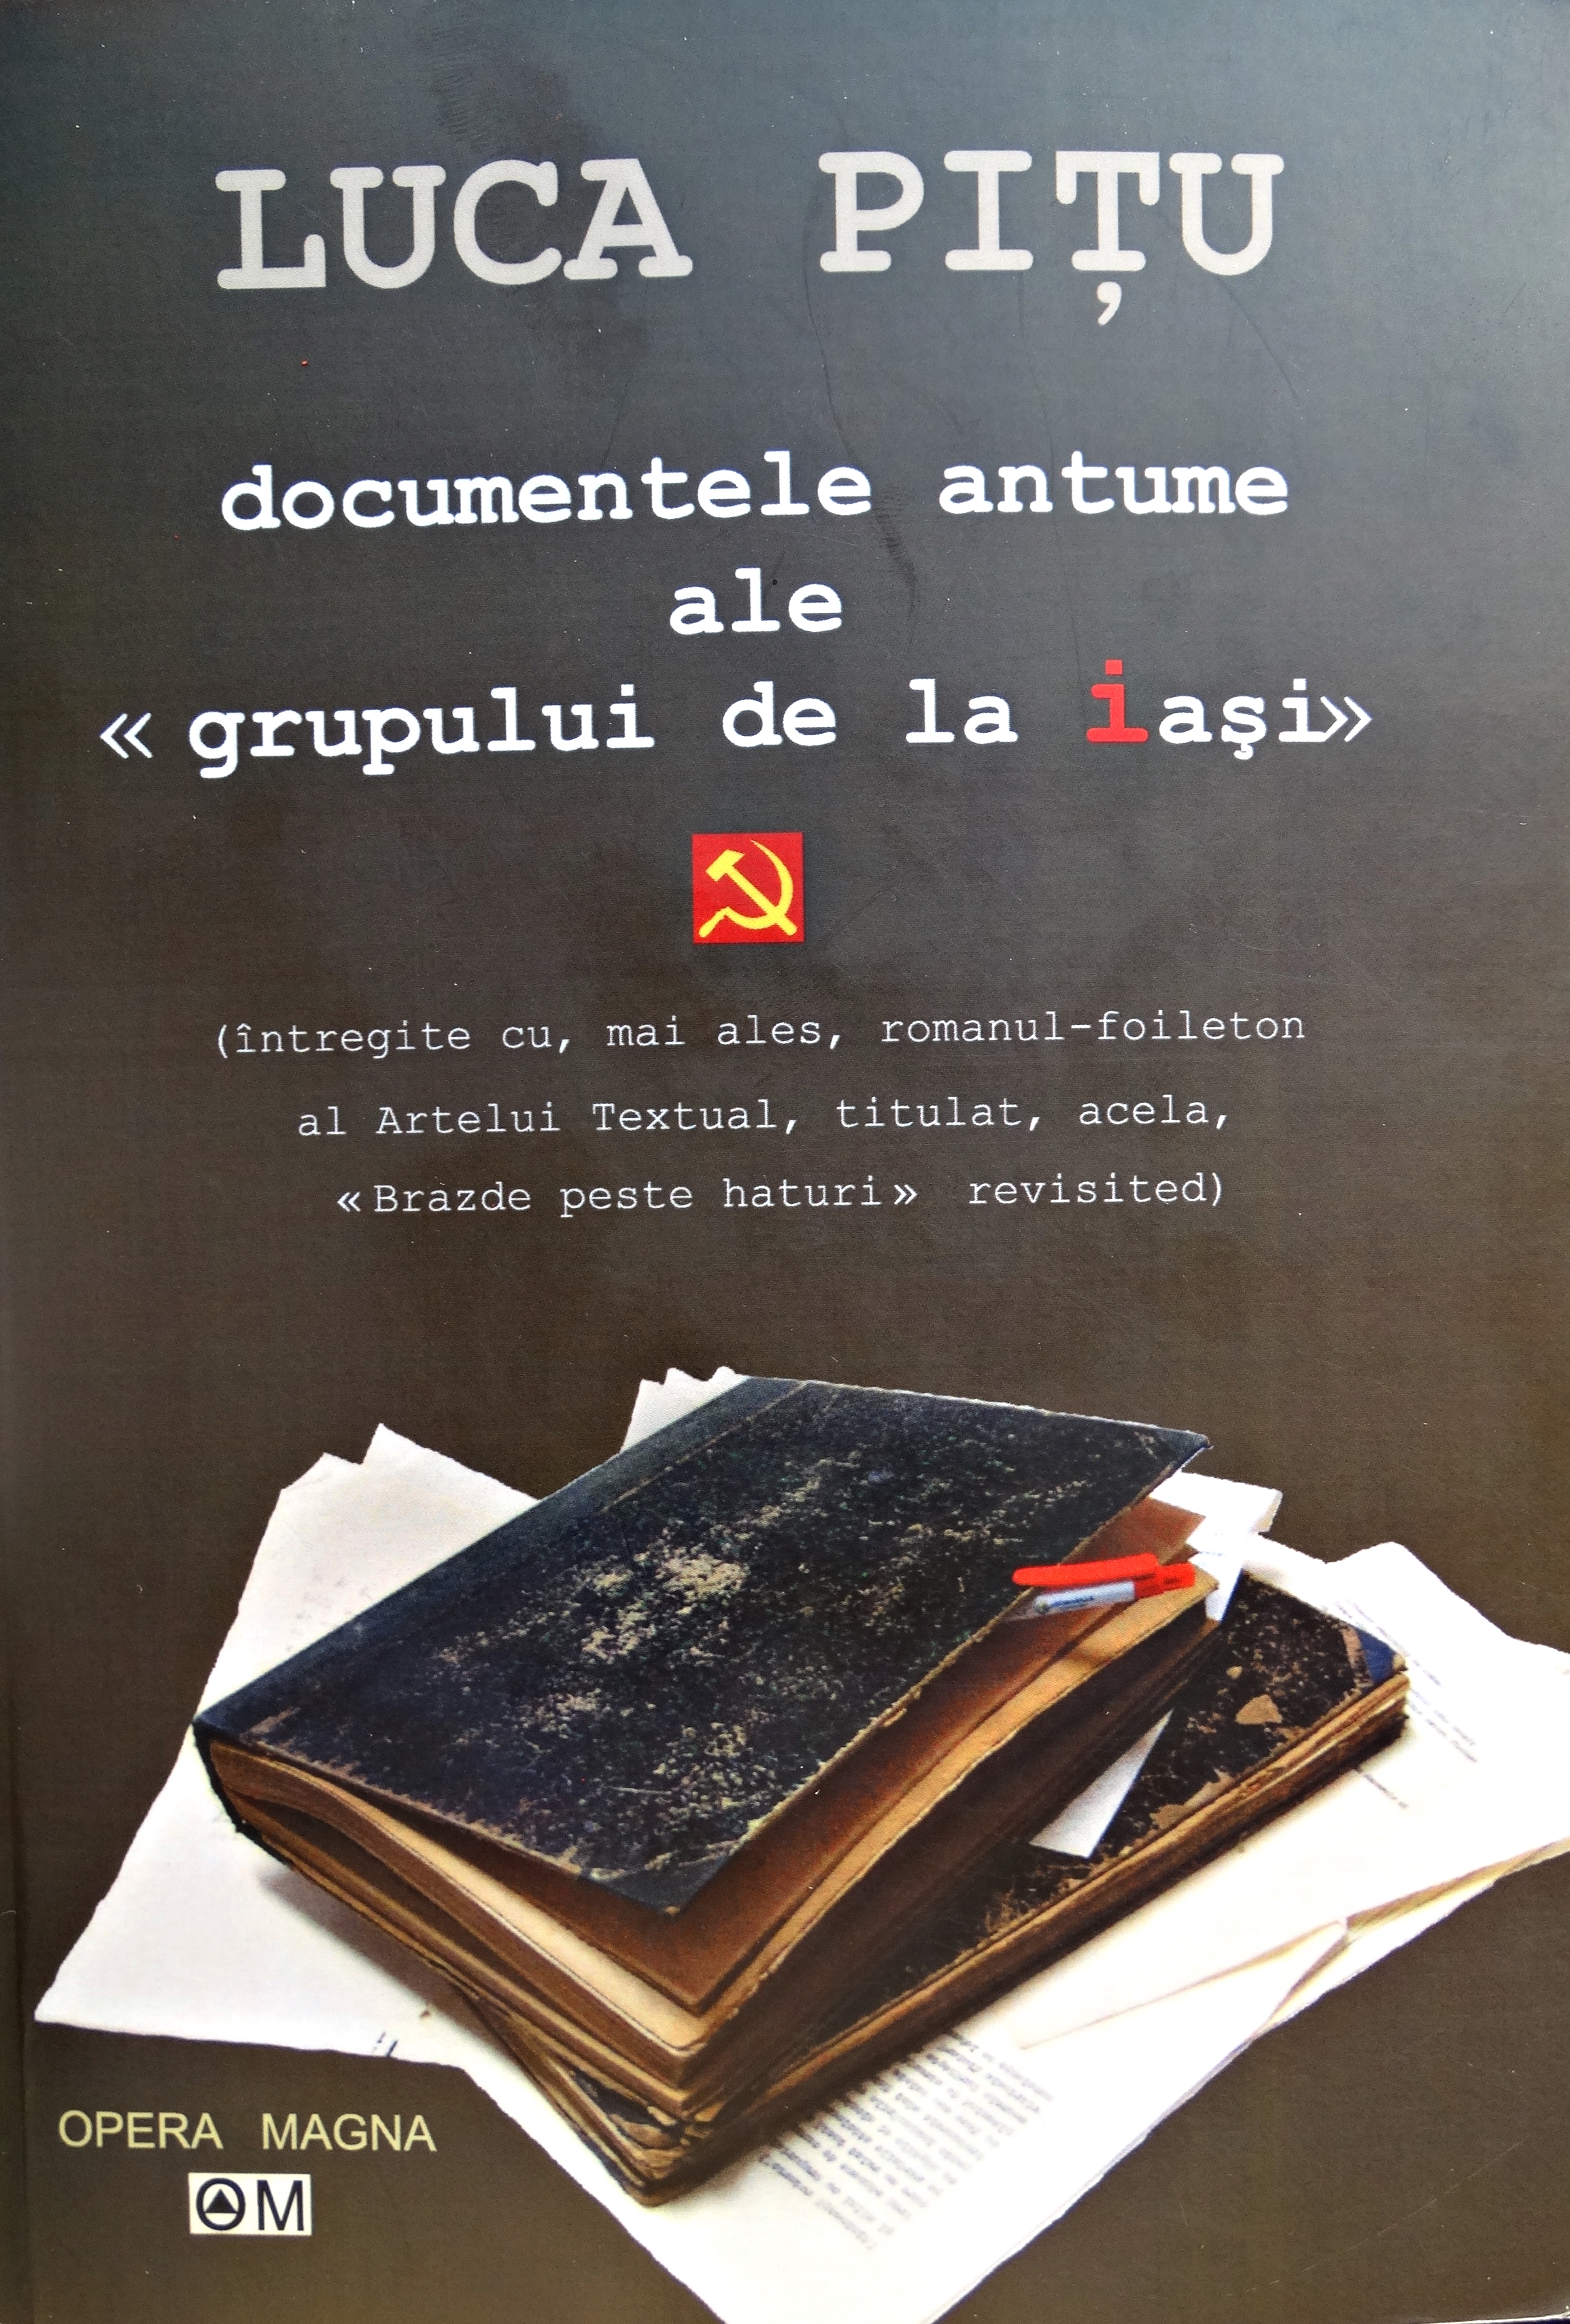 Cover of the book including the rediscovered parts of the confiscated manuscript 'Brazde peste haturi' revisited ('Furrows Across the Baulks' revisited) by Dan Petrescu et al.